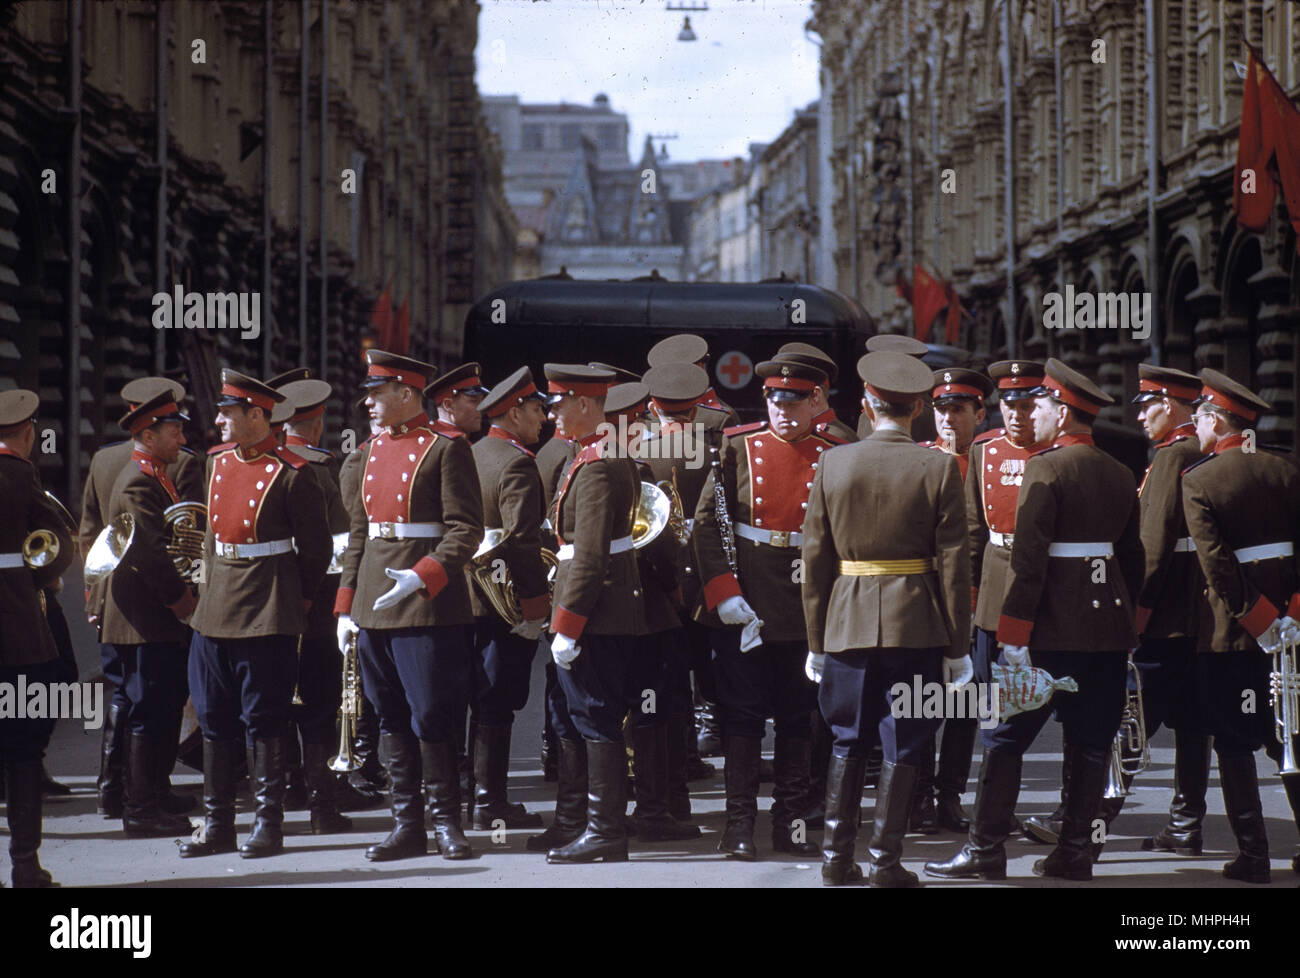 Street scene following the May Day celebrations in Moscow, in 1961 -- soldiers with musical instruments in a narrow street.     Date: 1961 Stock Photo